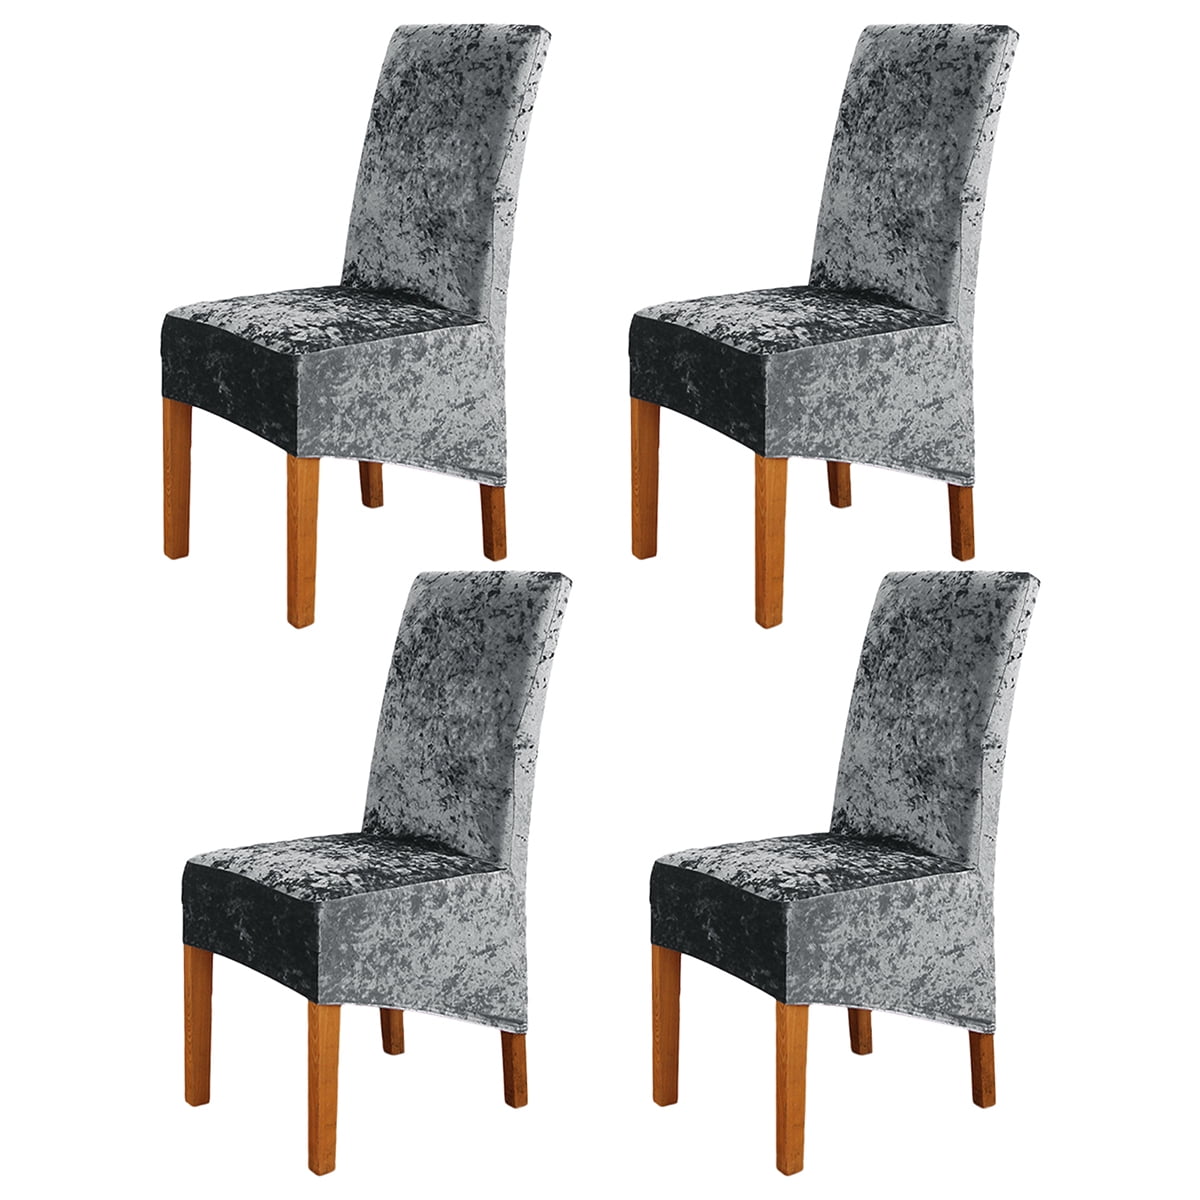 Mediu UK Velvet Dining Chairs Covers Slipcover Stretch High Back Chair Large